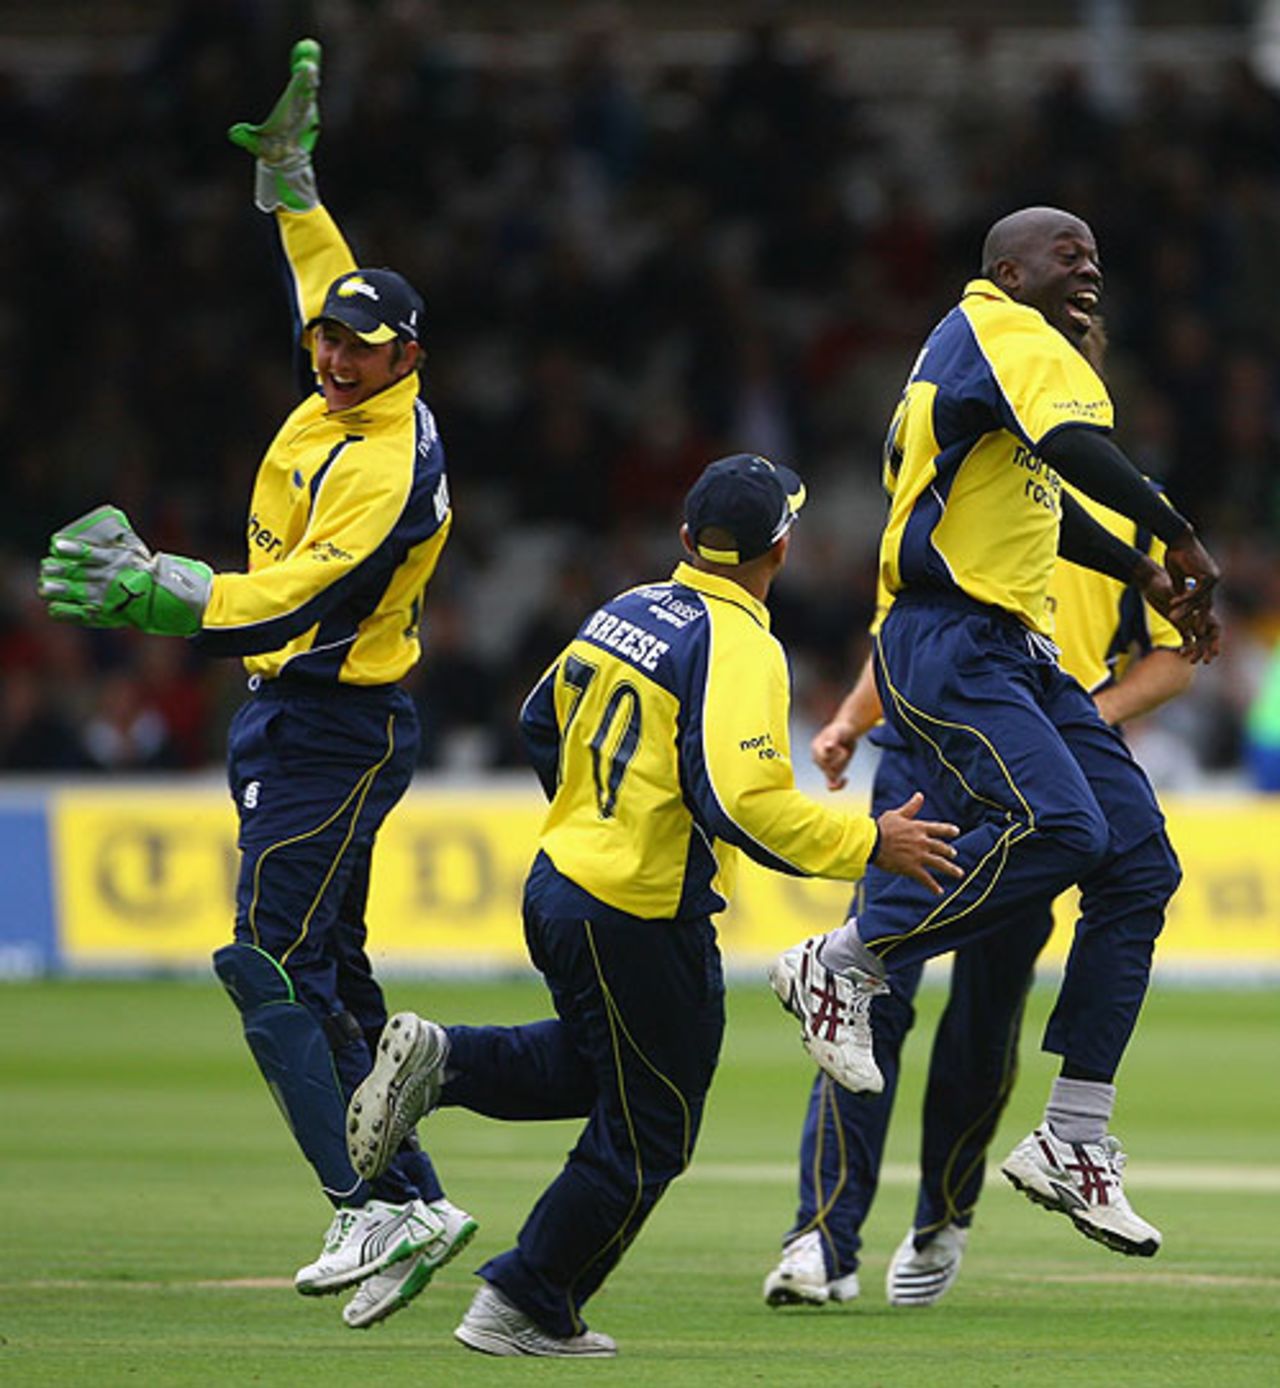 Durham celebrate Michael Lumb's wicket, Durham v Hampshire, Friends Provident Trophy final, Lord's, August 18, 2007